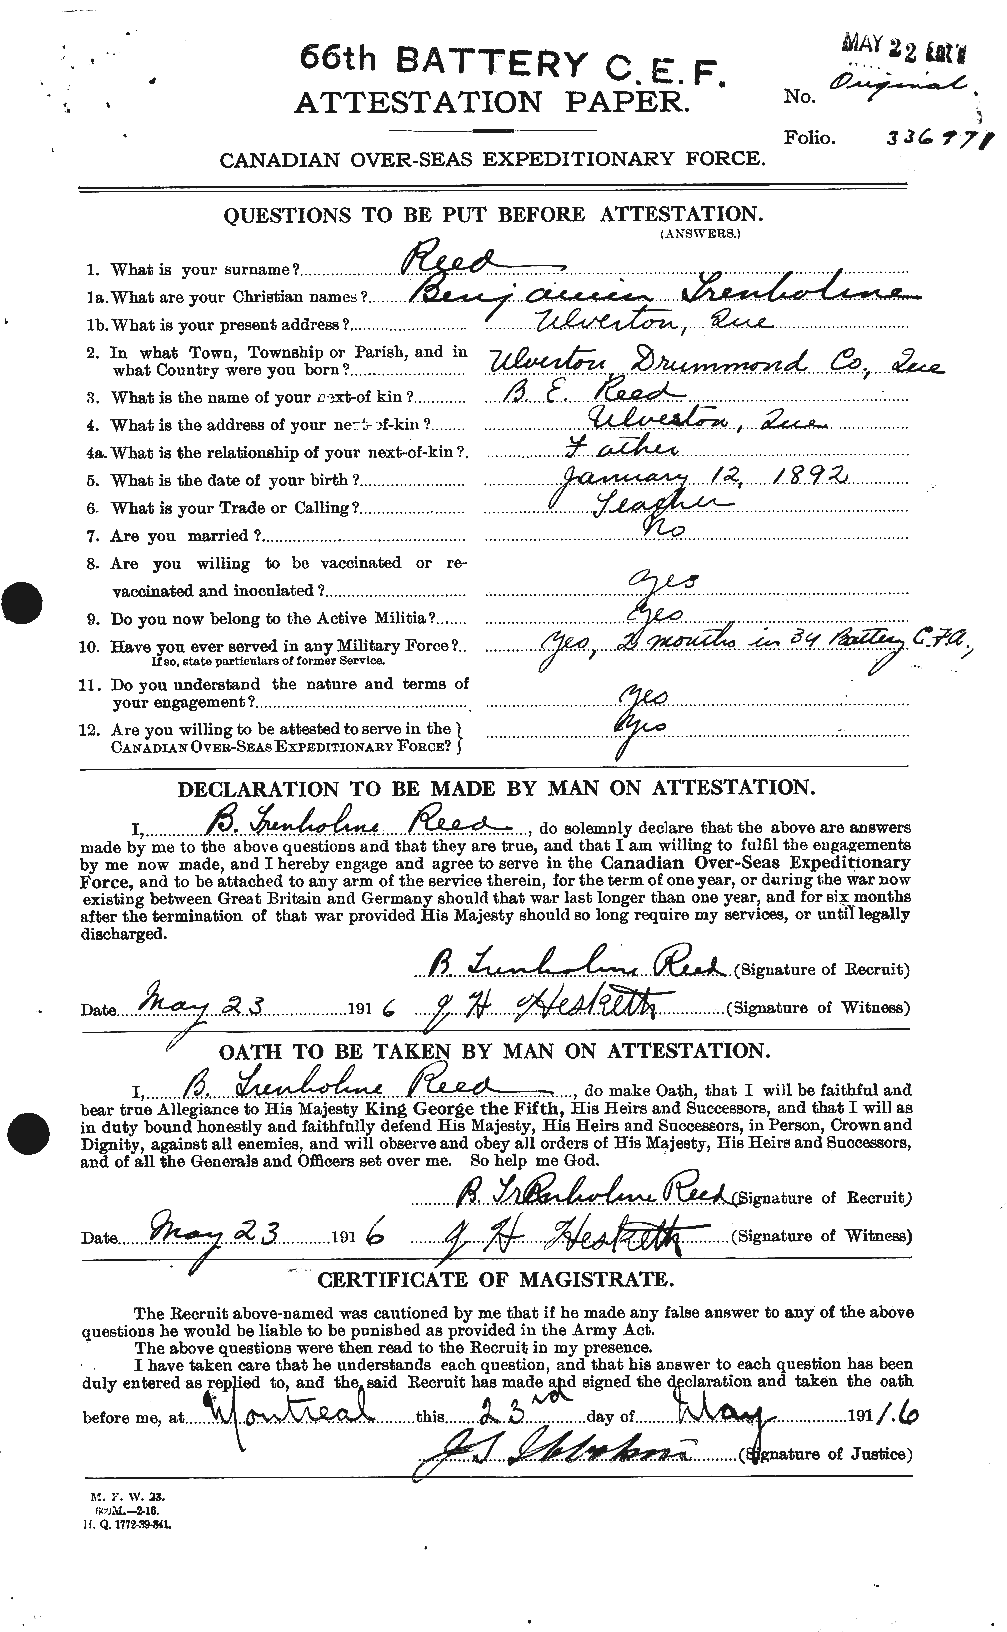 Personnel Records of the First World War - CEF 596318a